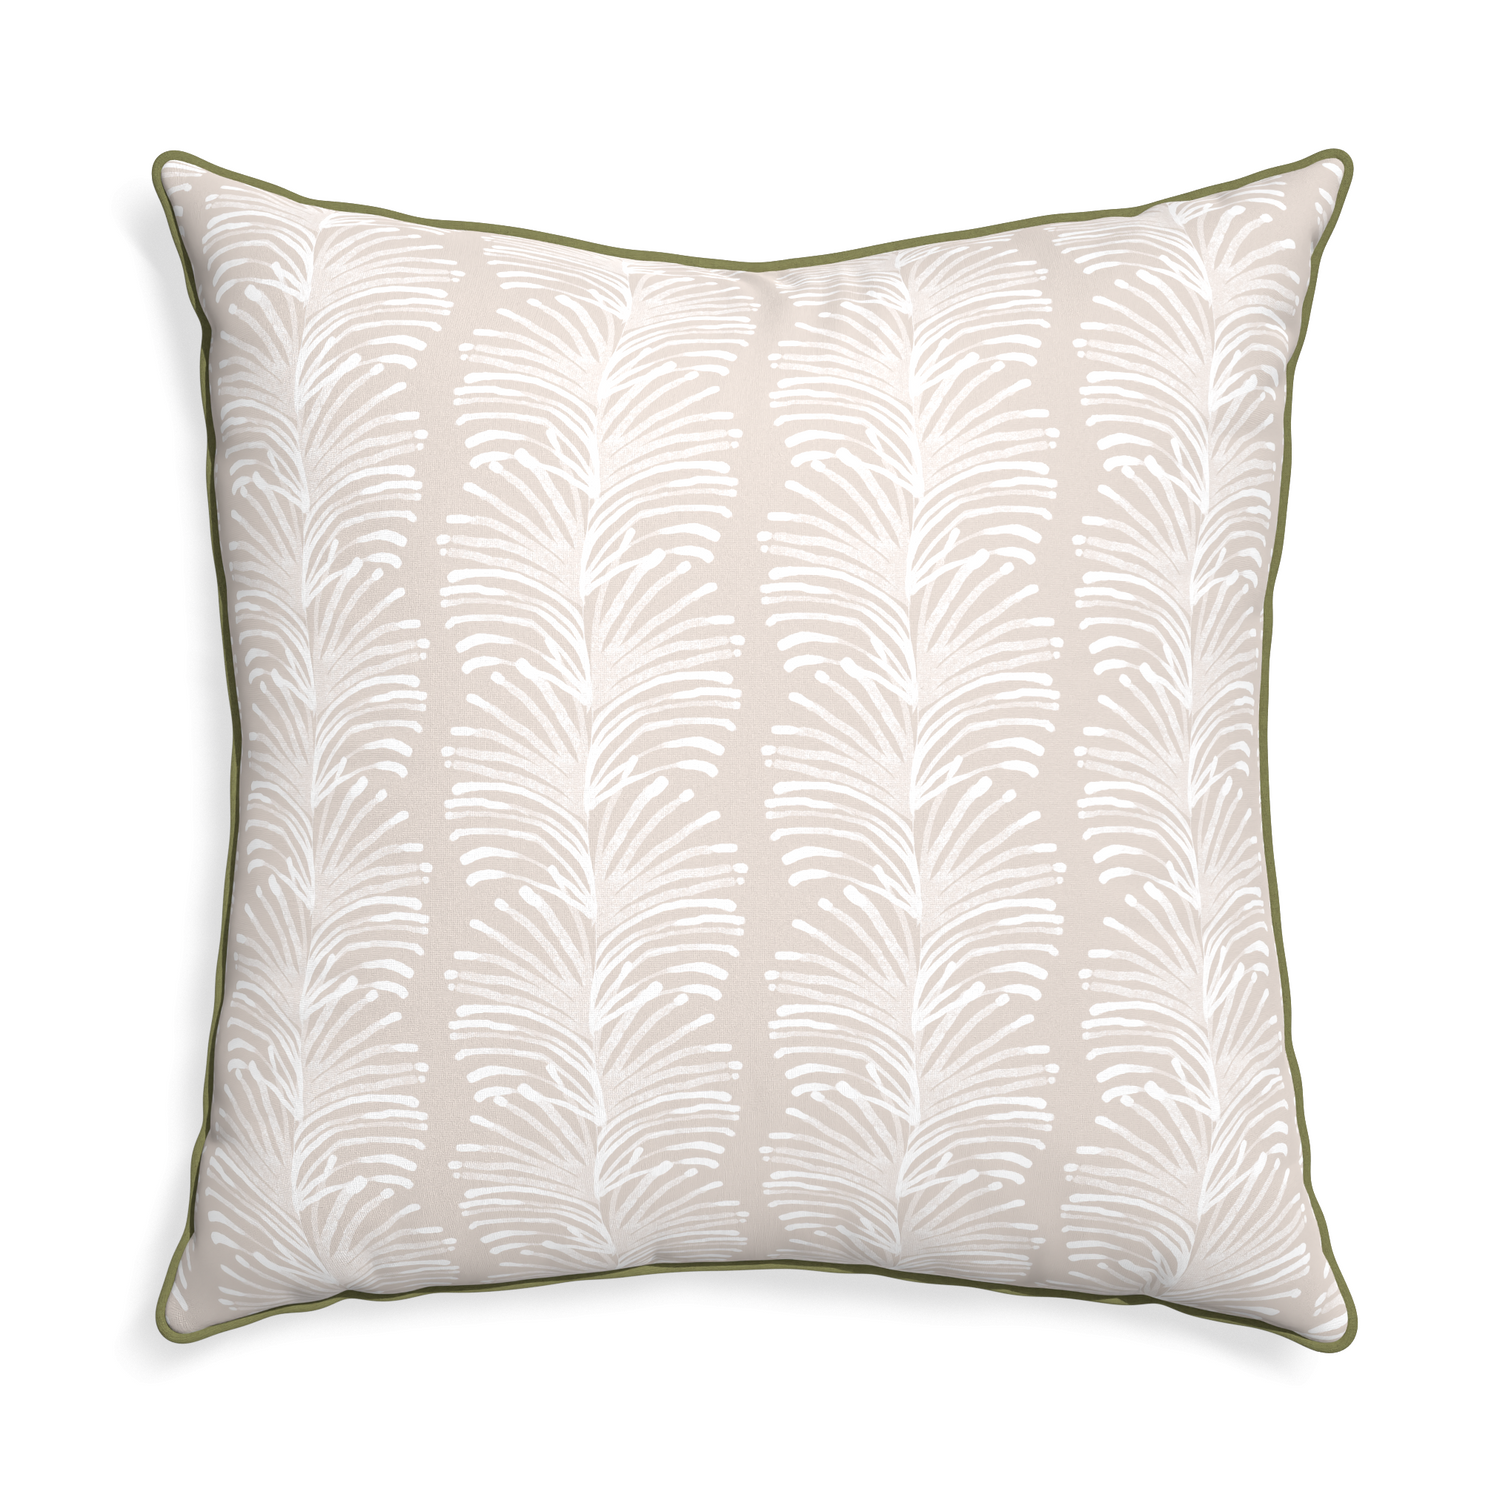 Euro-sham emma sand custom sand colored botanical stripepillow with moss piping on white background